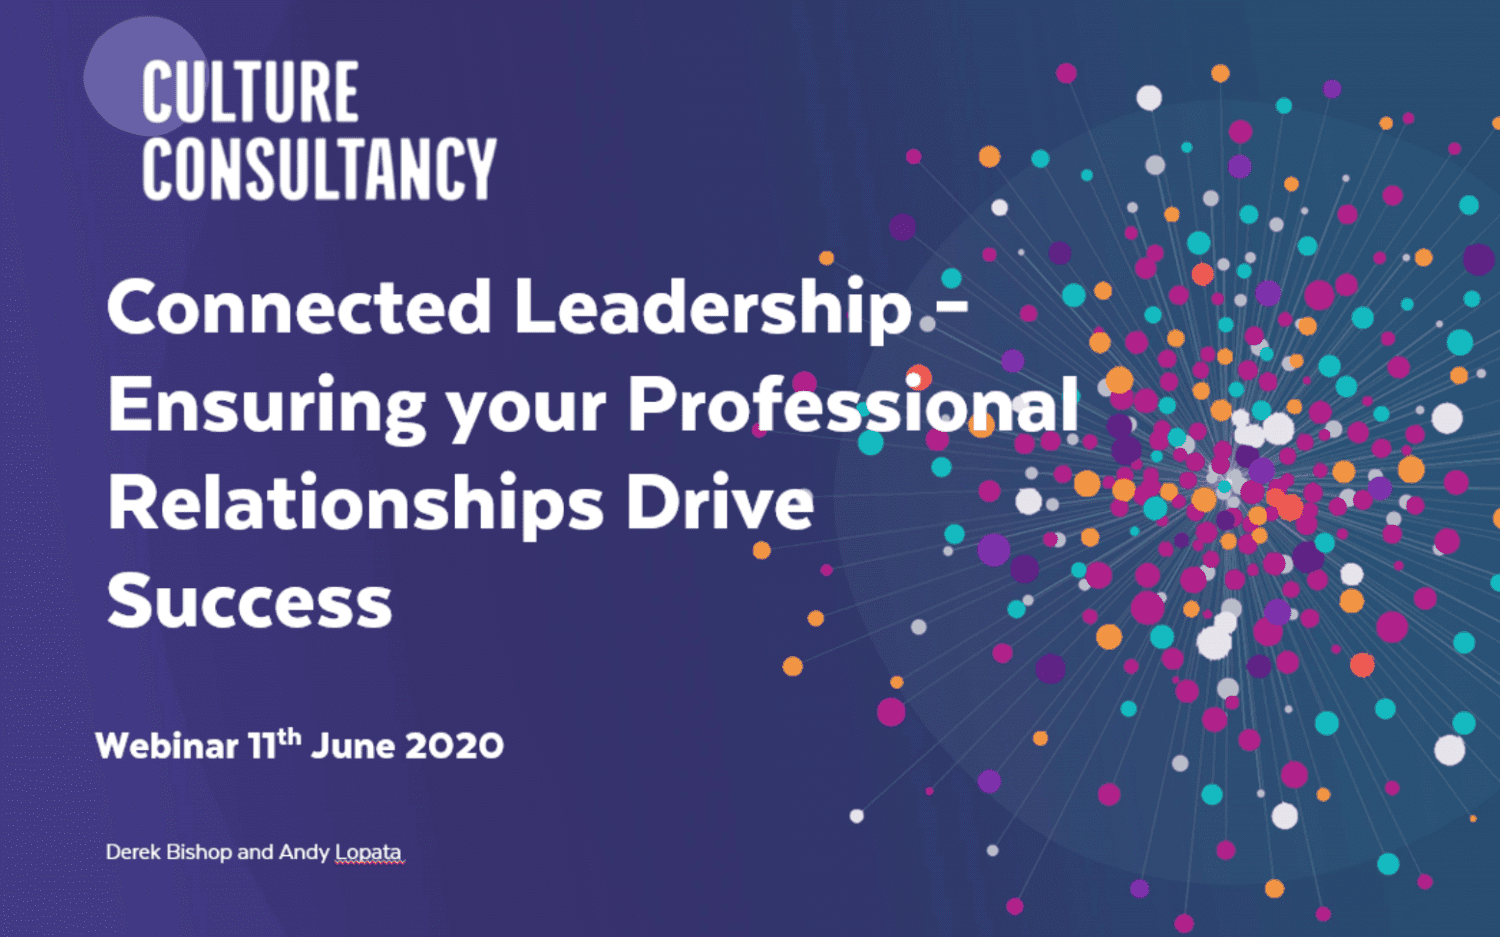 Connected Leadership - ensuring your professional relationships drive success